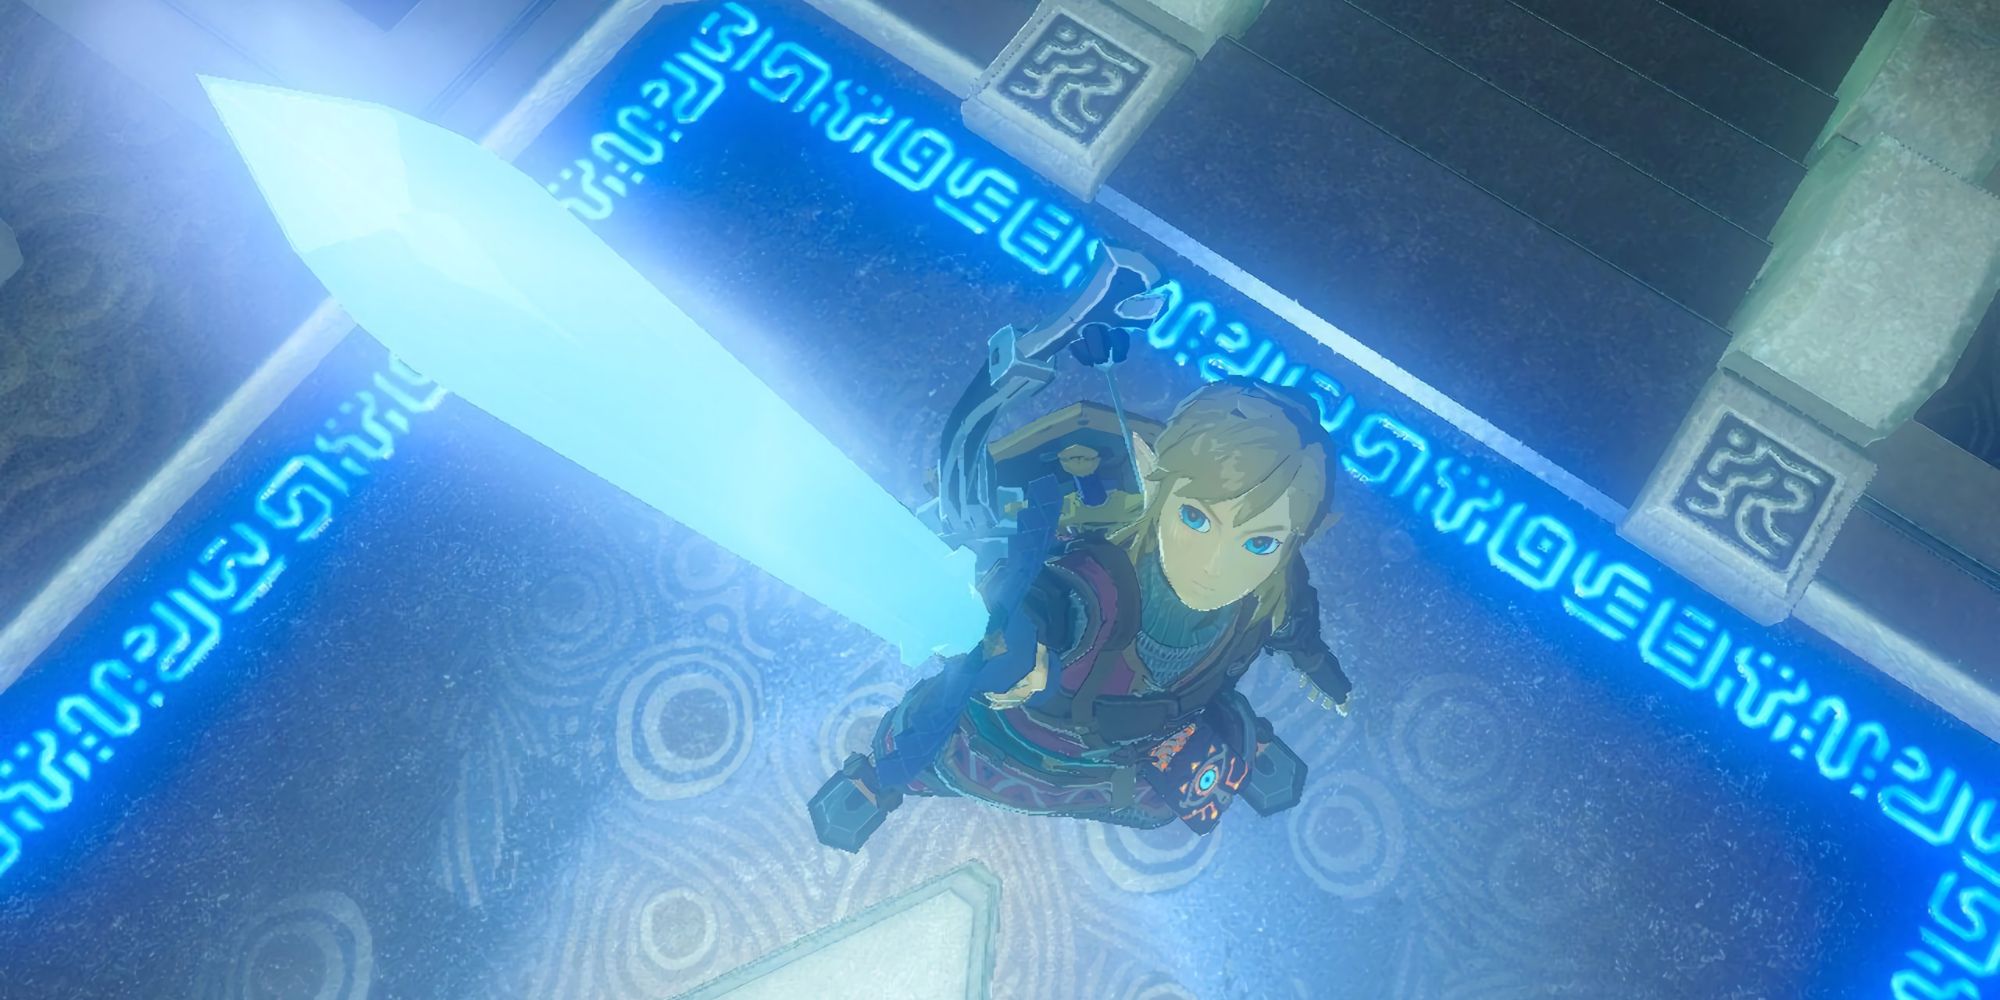 BOTW 2 could better implement a challenge mini-dungeon like the Trial of the Sword at launch